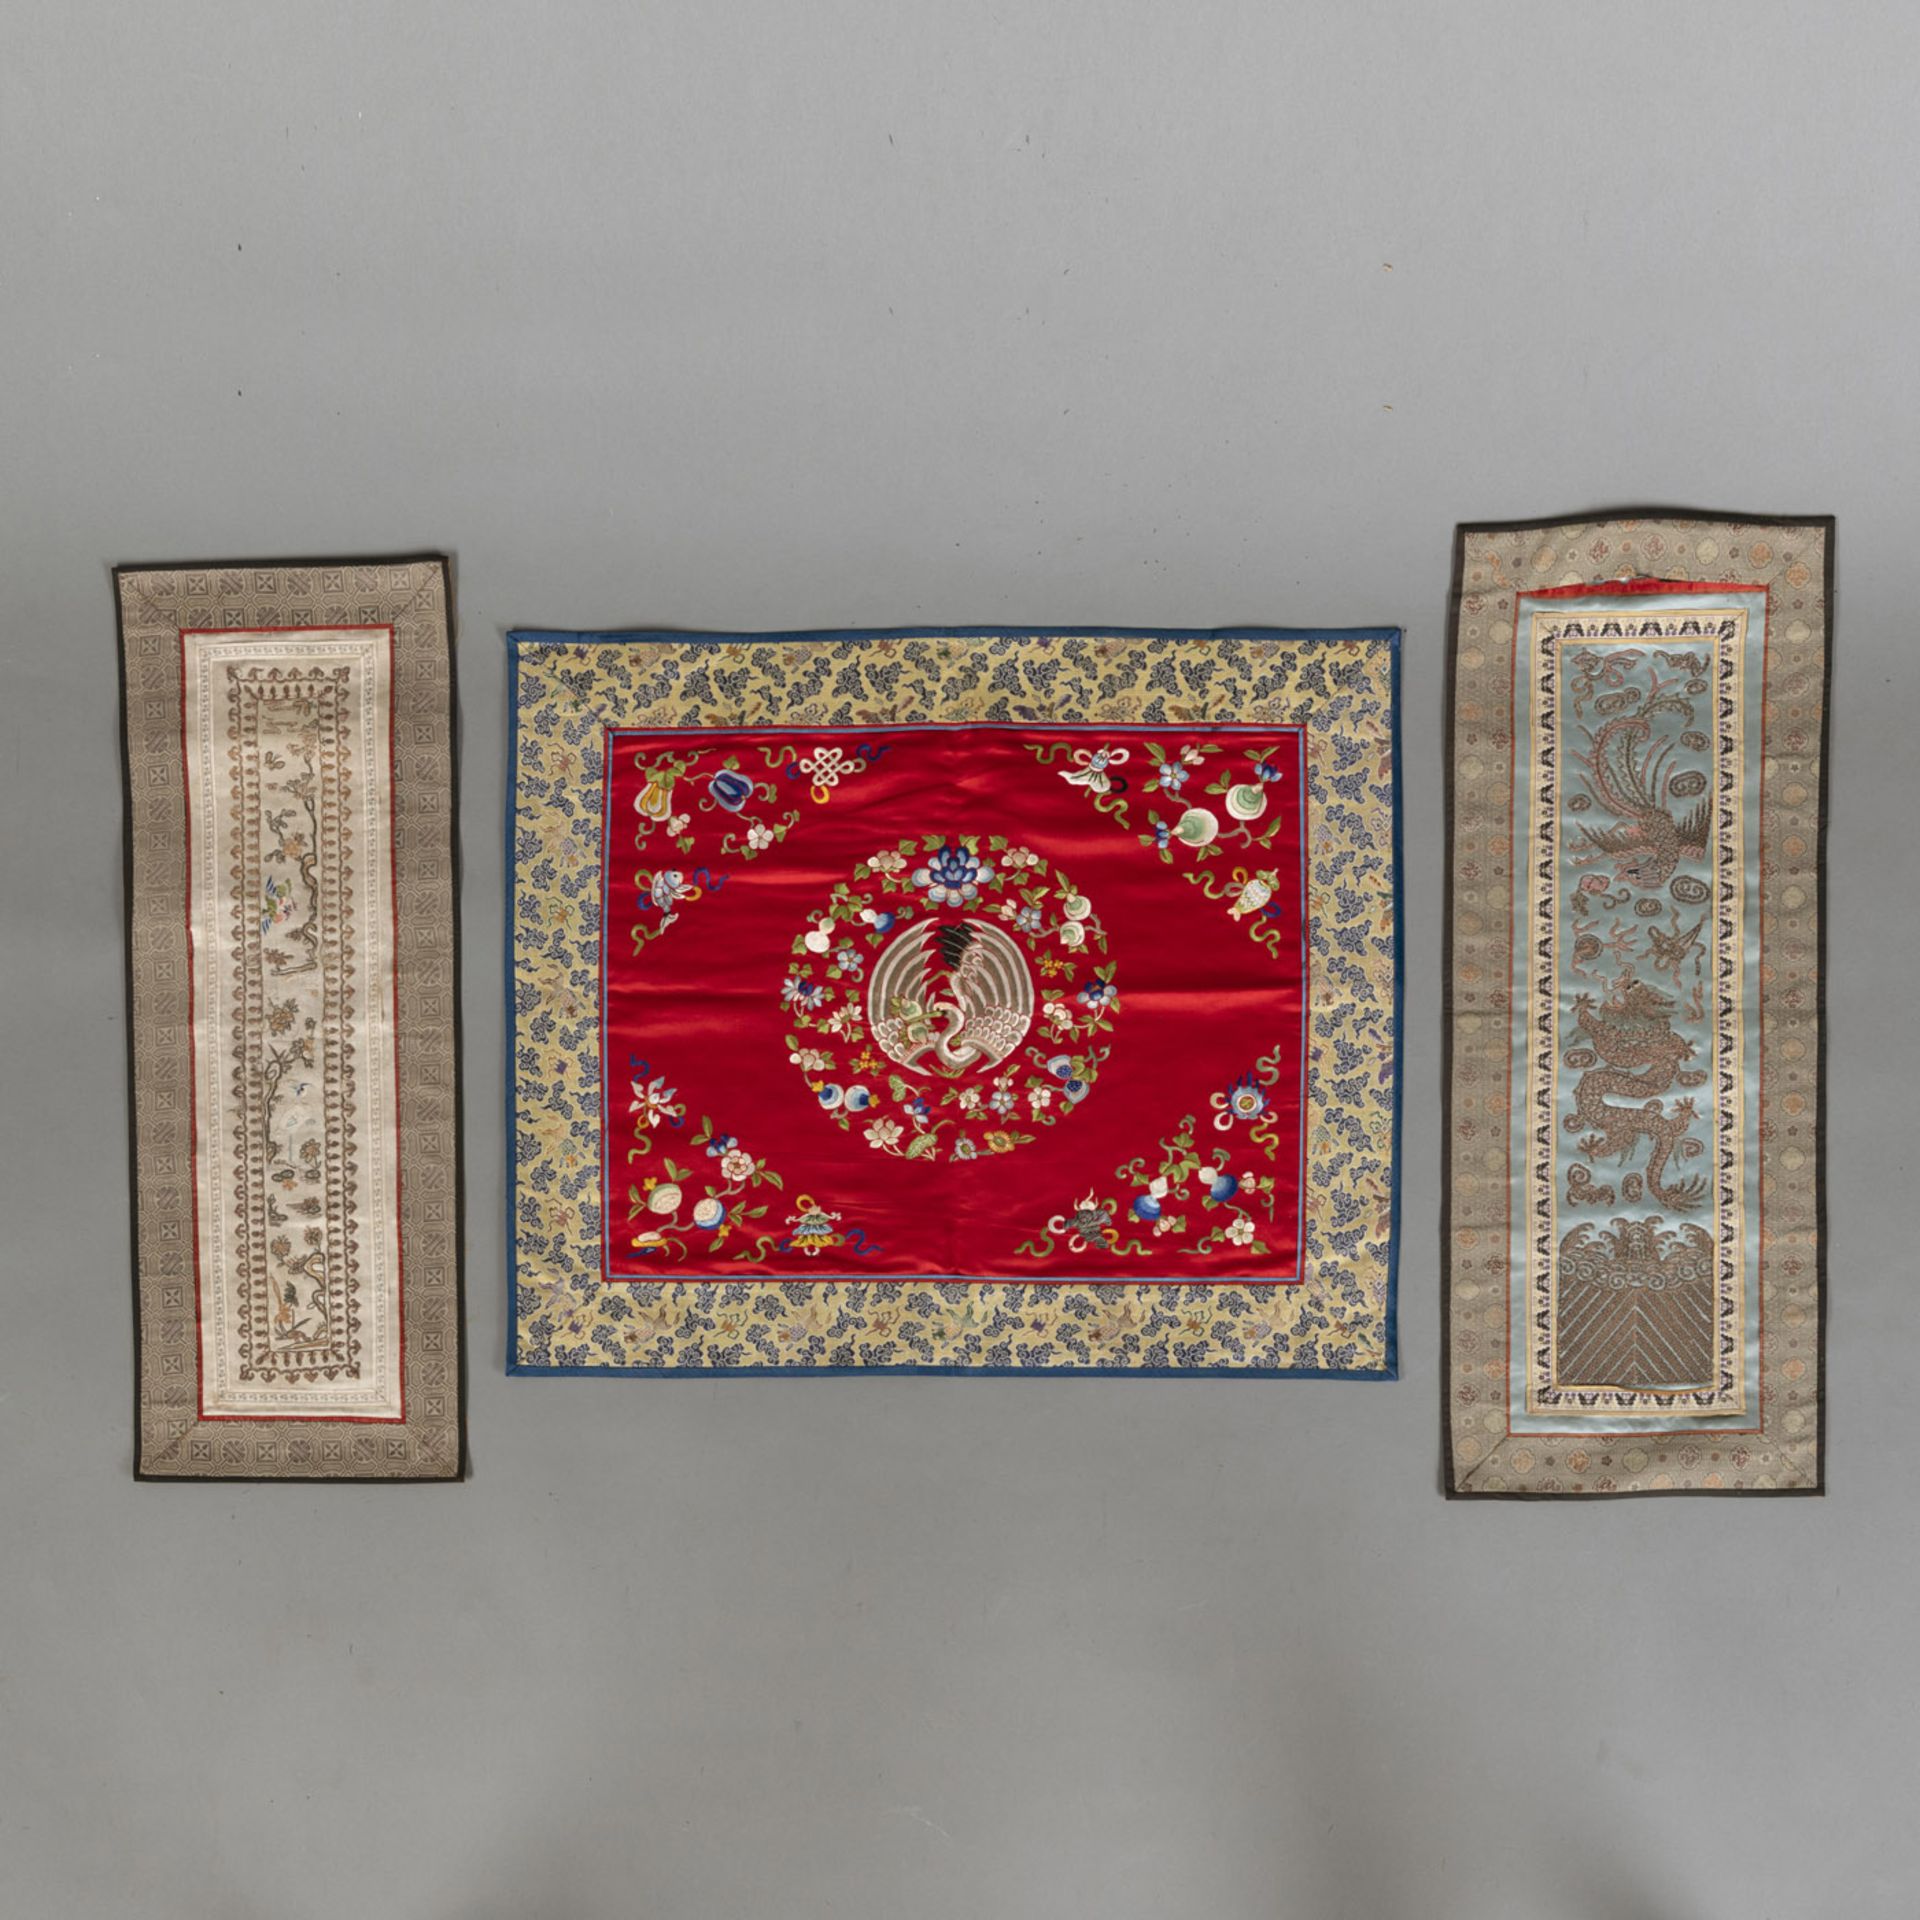 EIGHT SILK EMBROIDERIES DEPICTING DRAGONS AND OTHER ANIMALS AND FIGURES